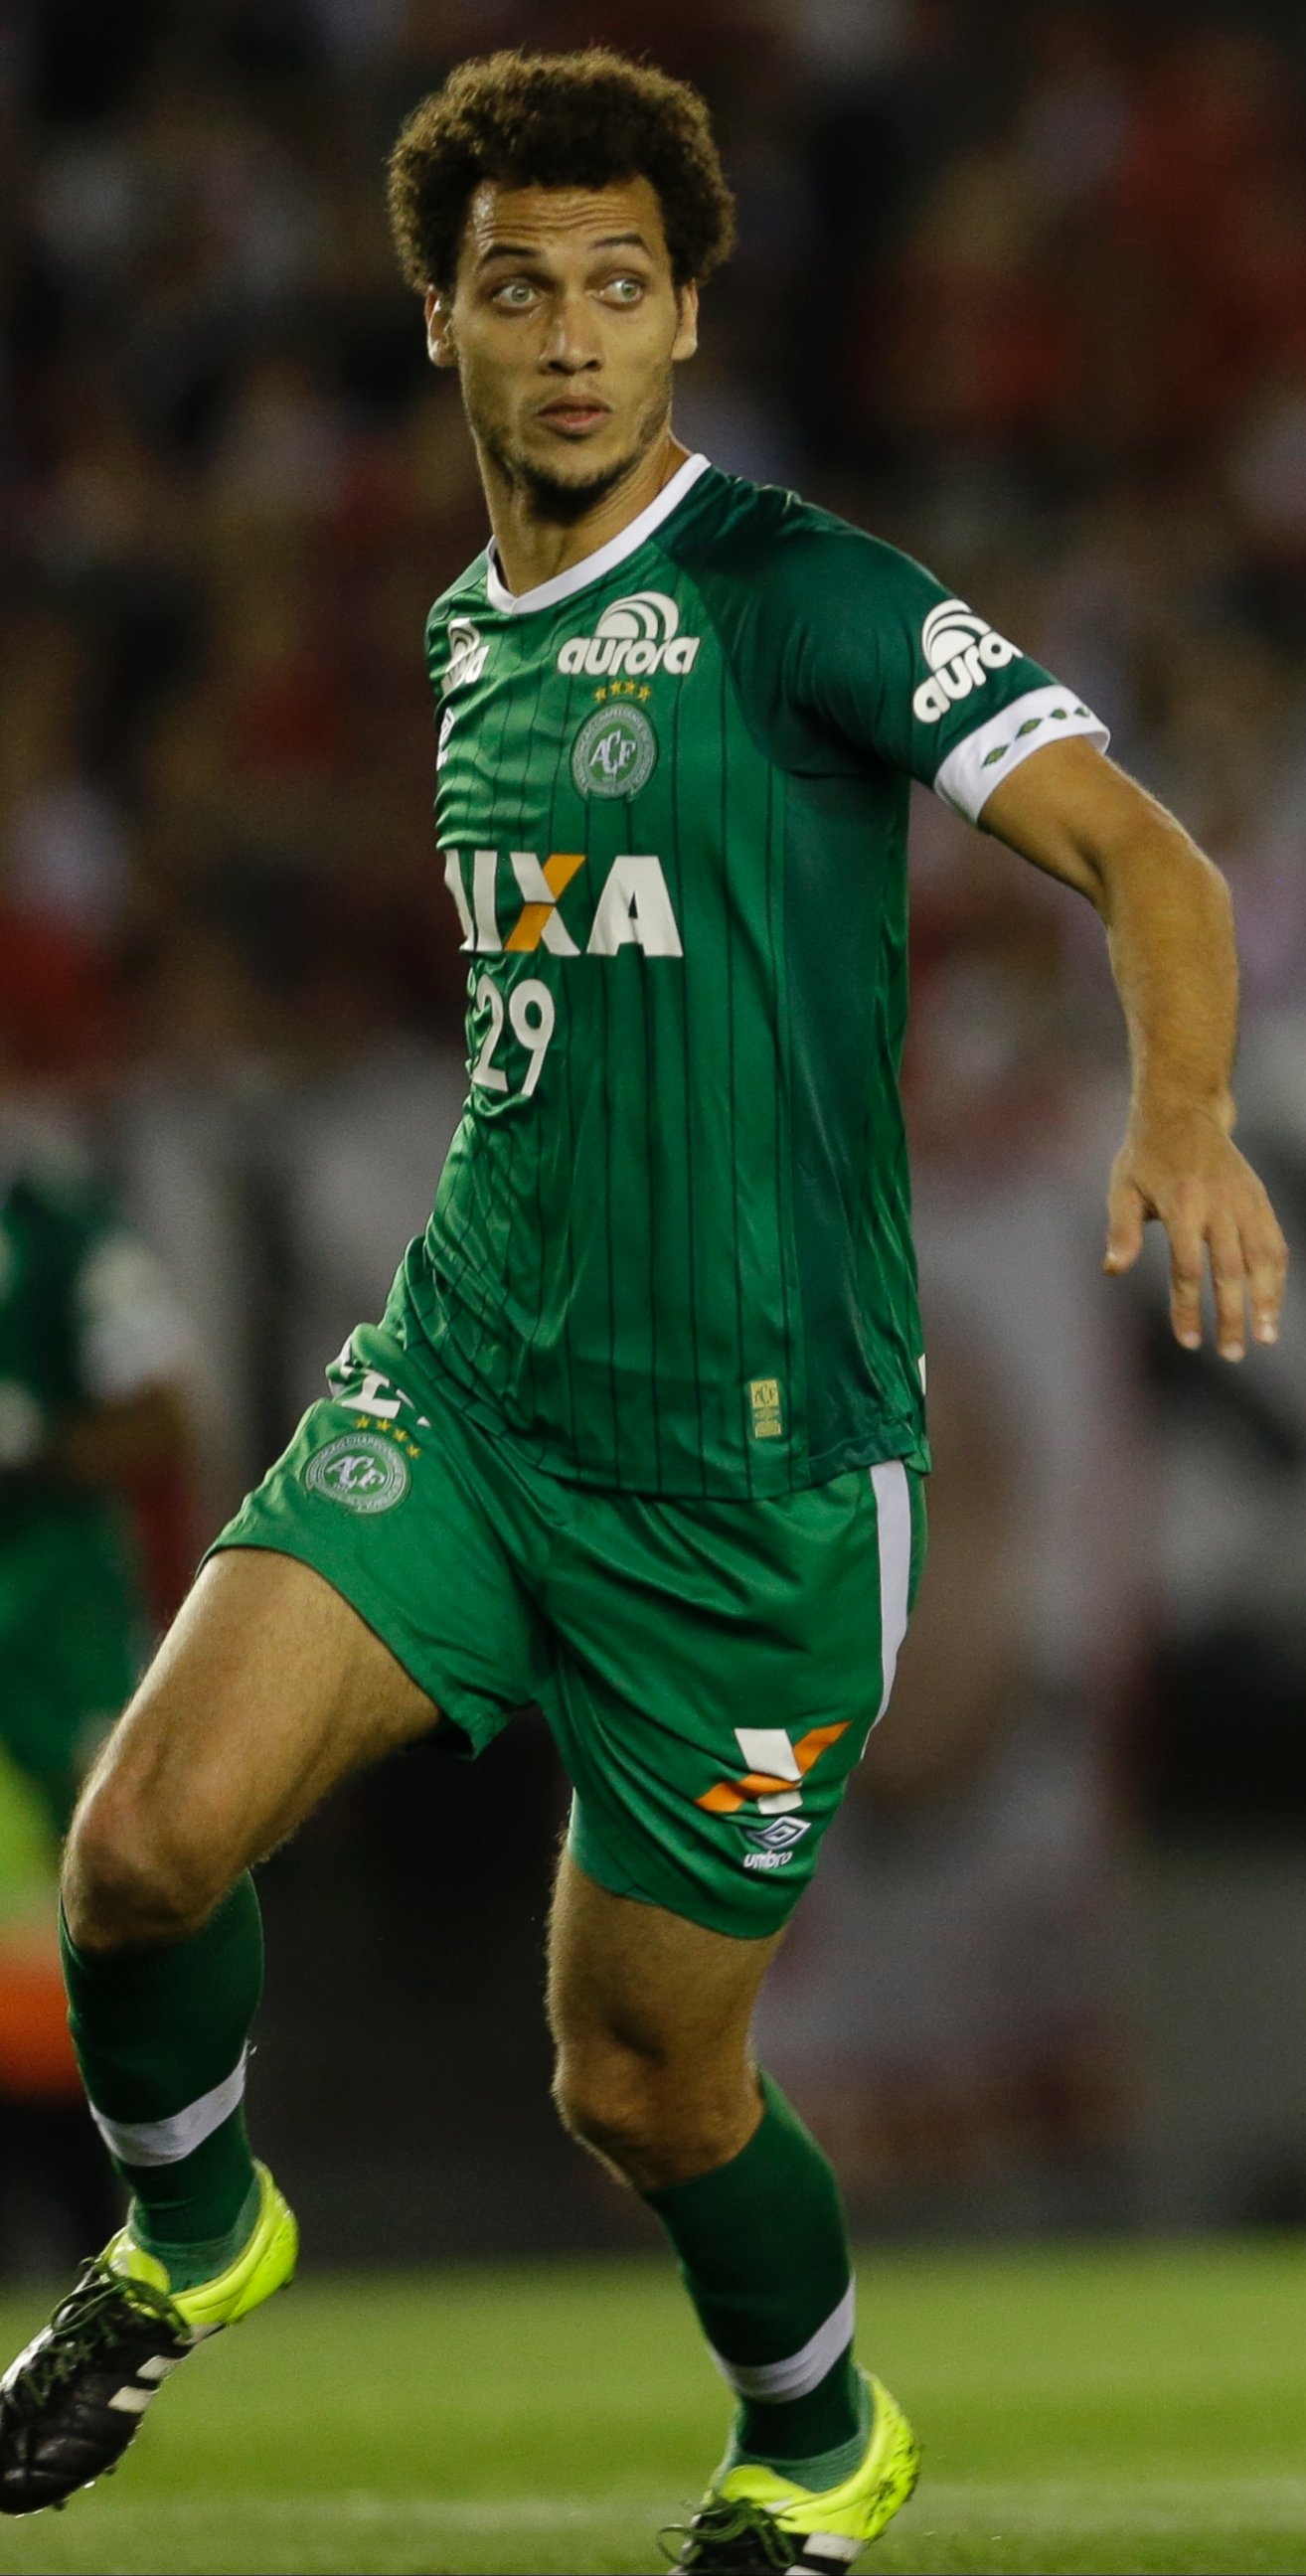 PHOTO: This Sept. 24, 2015 photo shows Brazil's Chapecoense Helio Neto on the pitch during a Copa Sudamericana soccer game in Asuncion, Paraguay. Neto survived a plane crash carrying his Brazilian first division soccer club team.